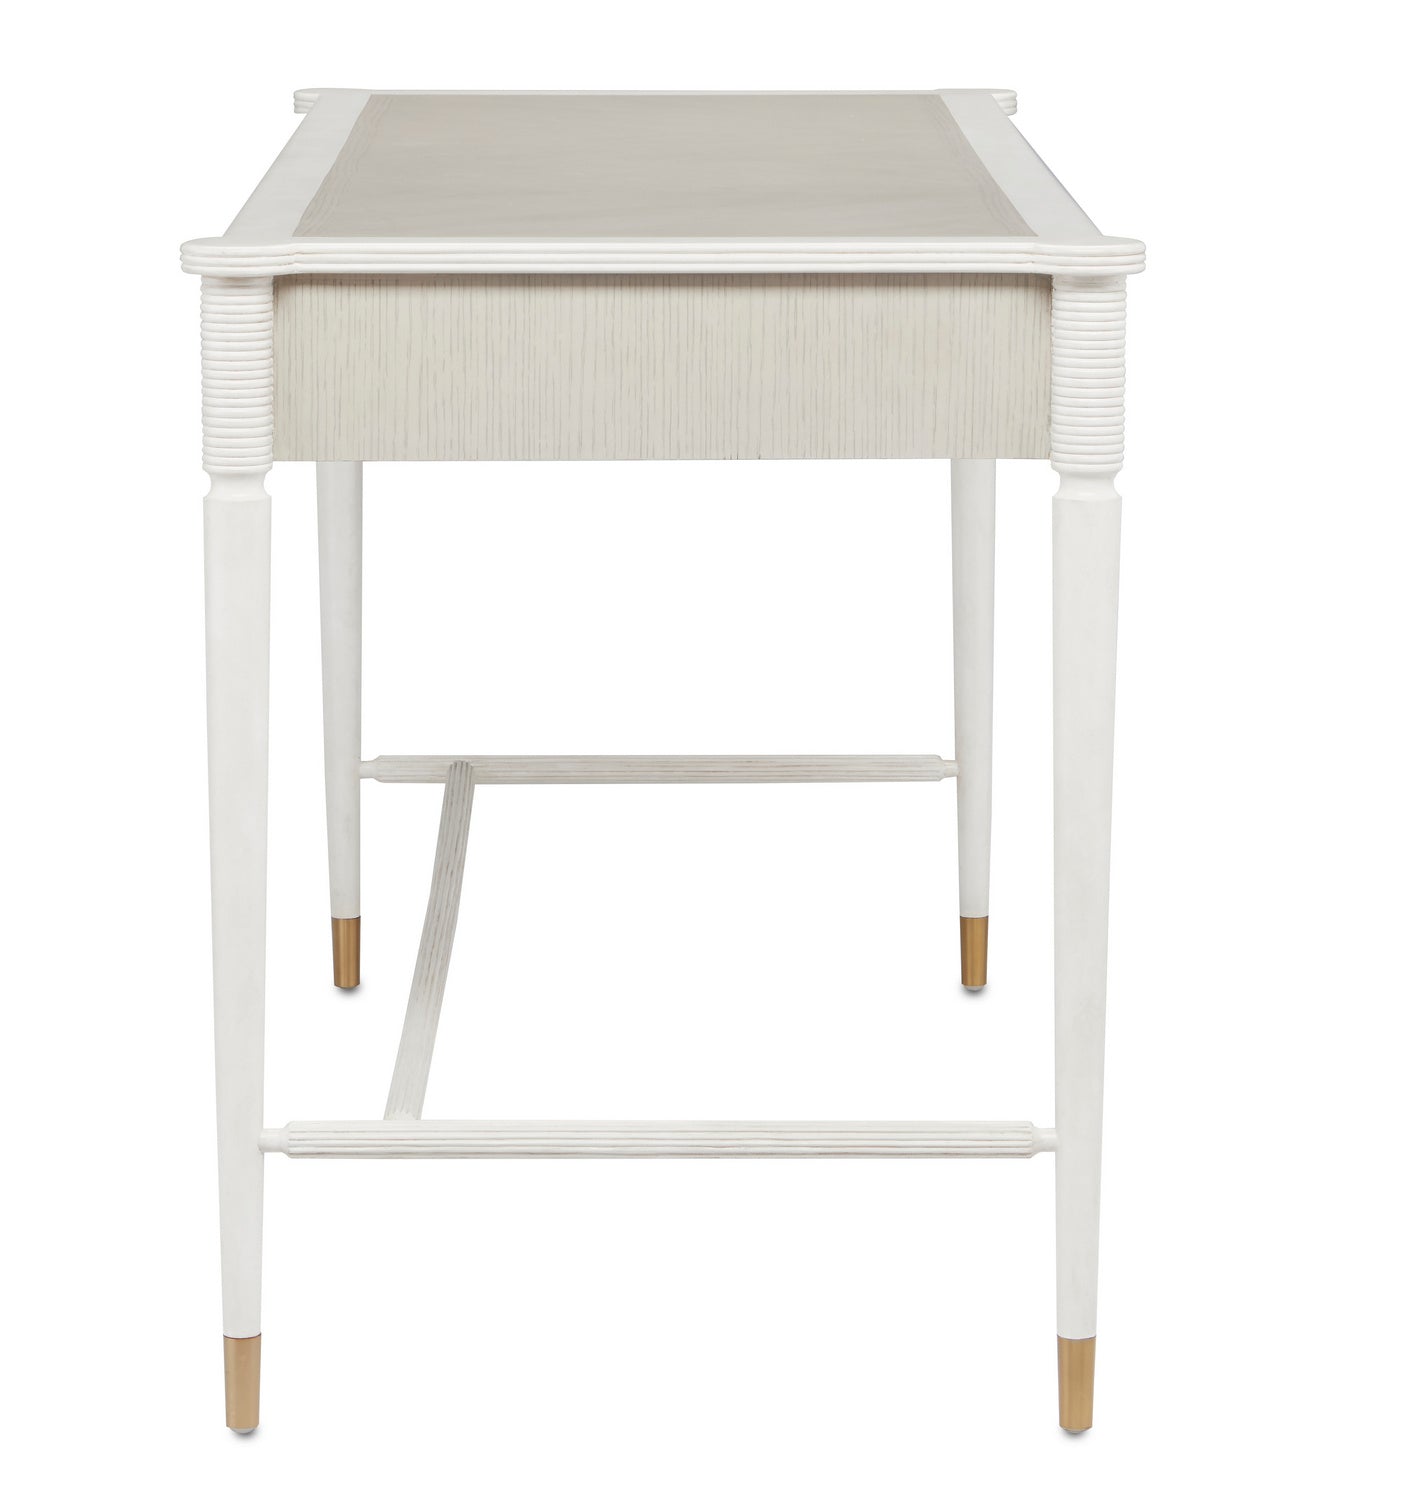 Desk from the Winterthur collection in Off White/Fog/Brass finish